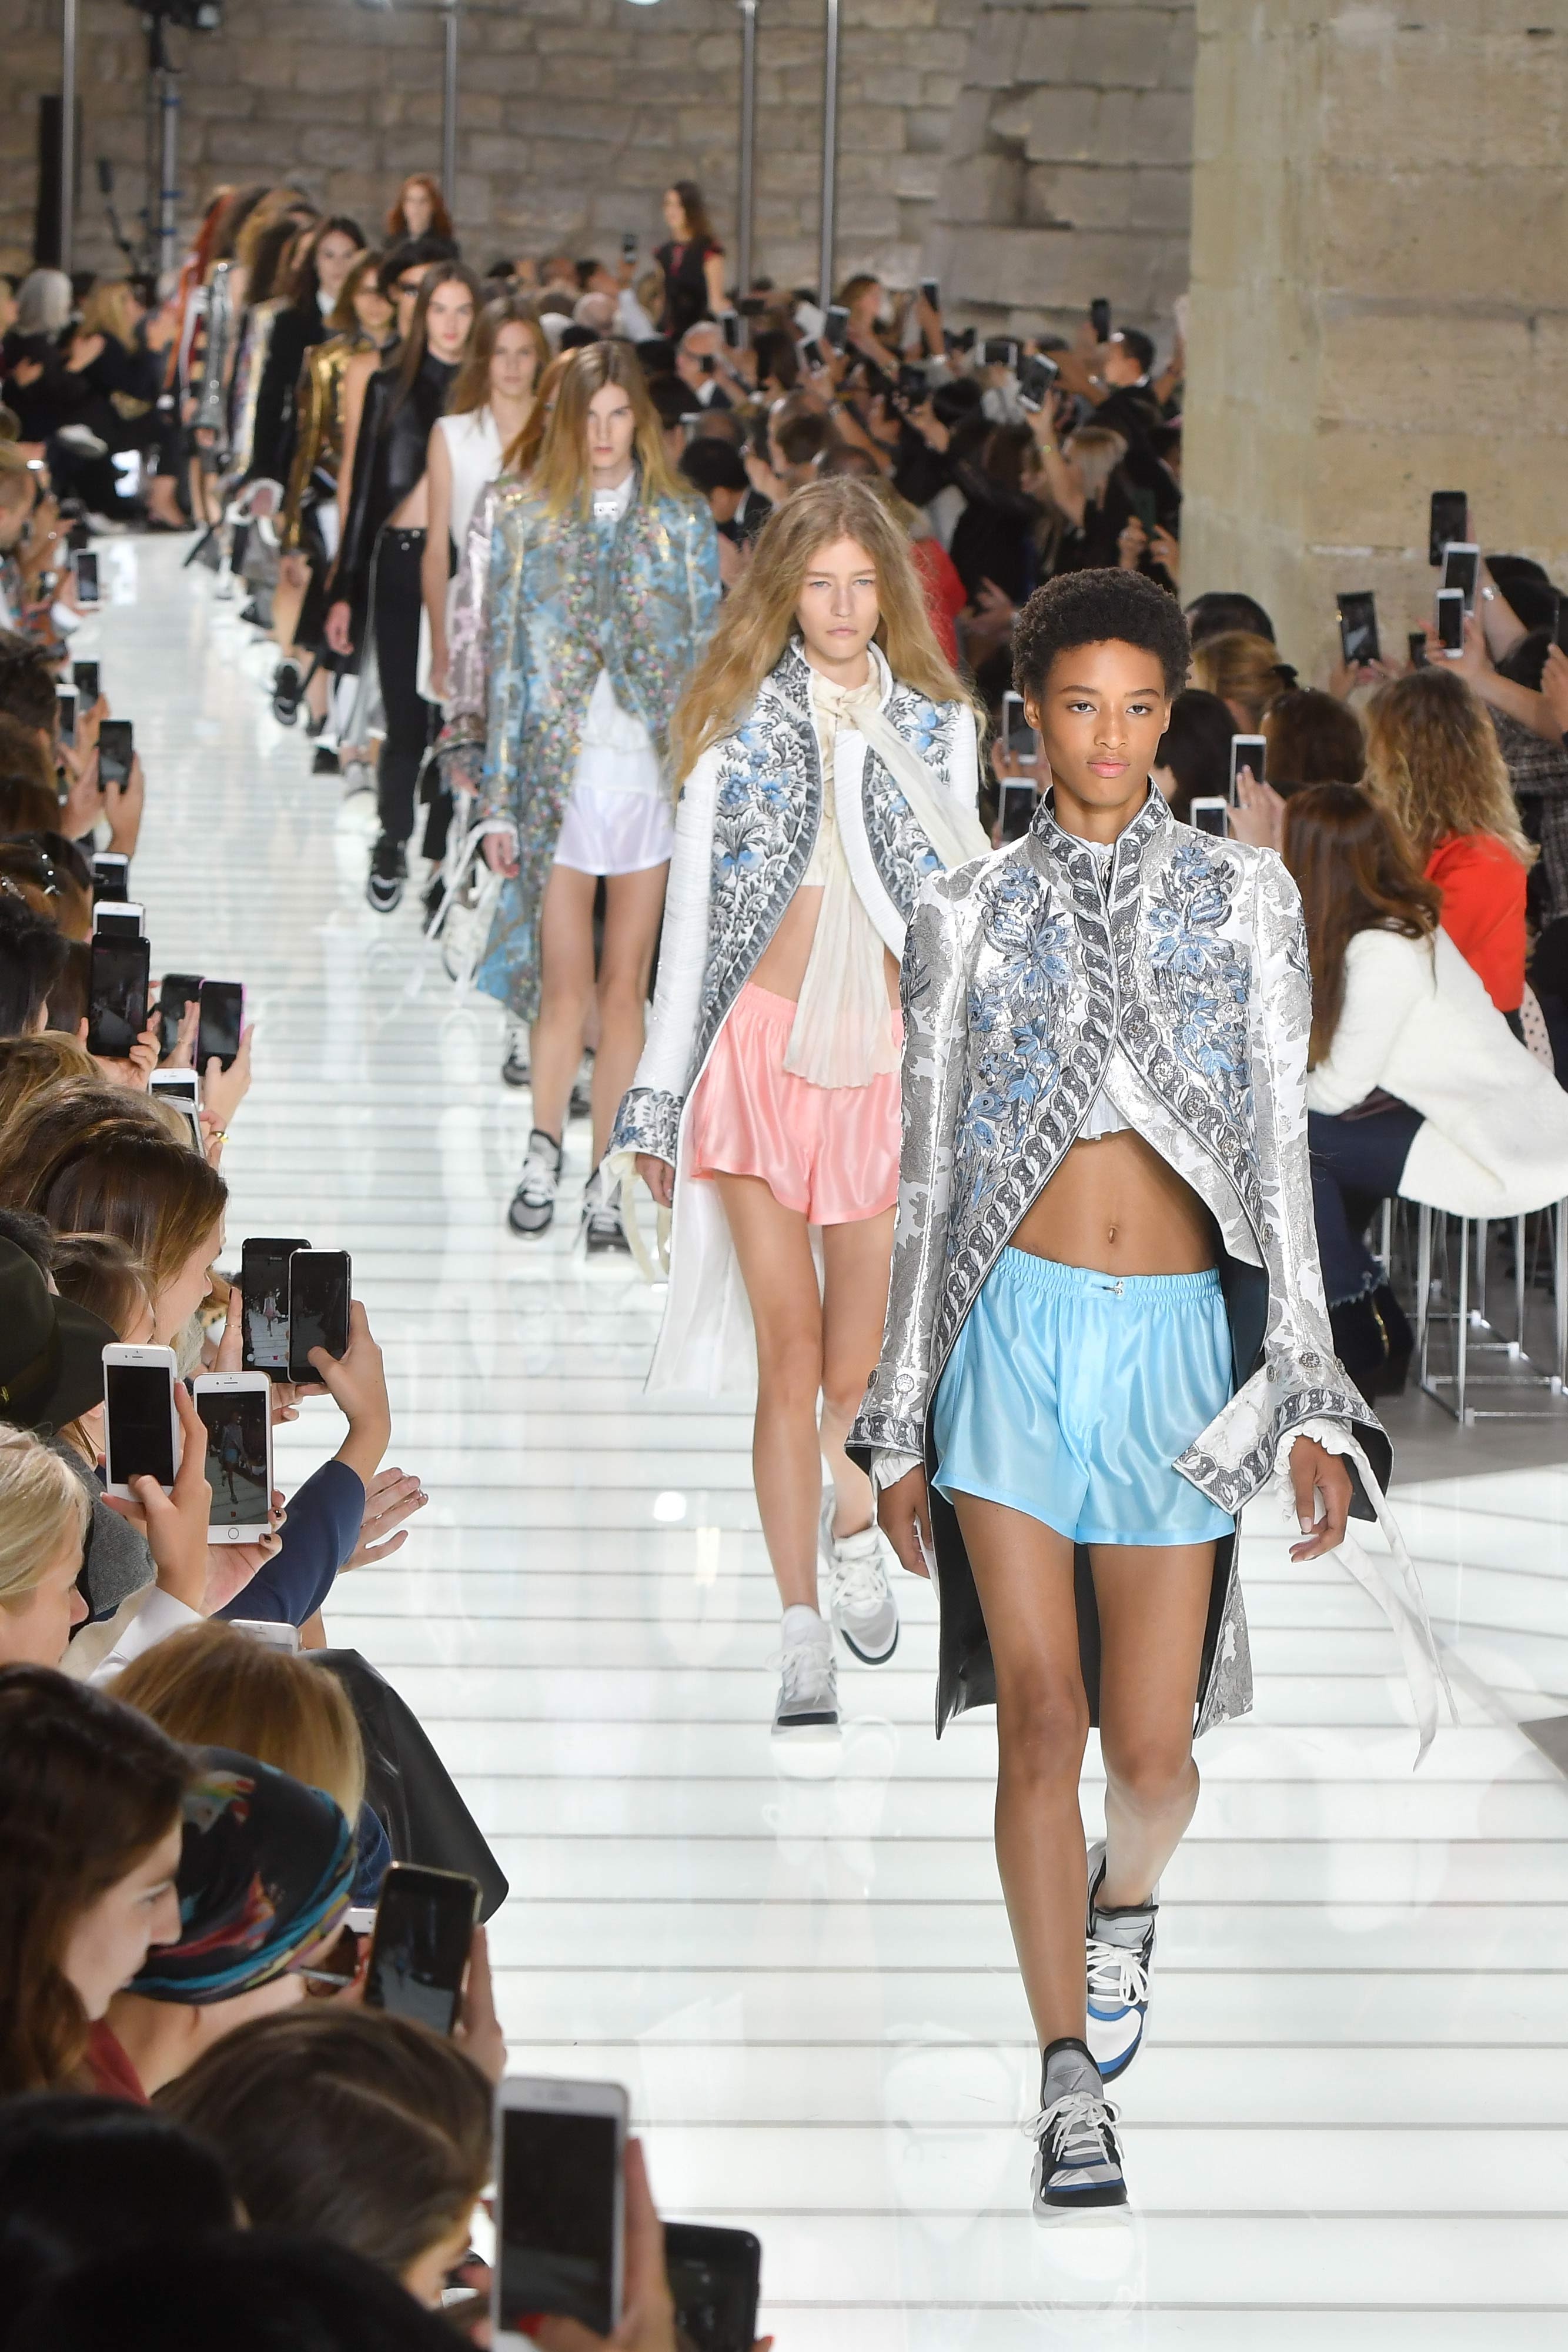 The most iconic Paris Fashion Week moments of all time